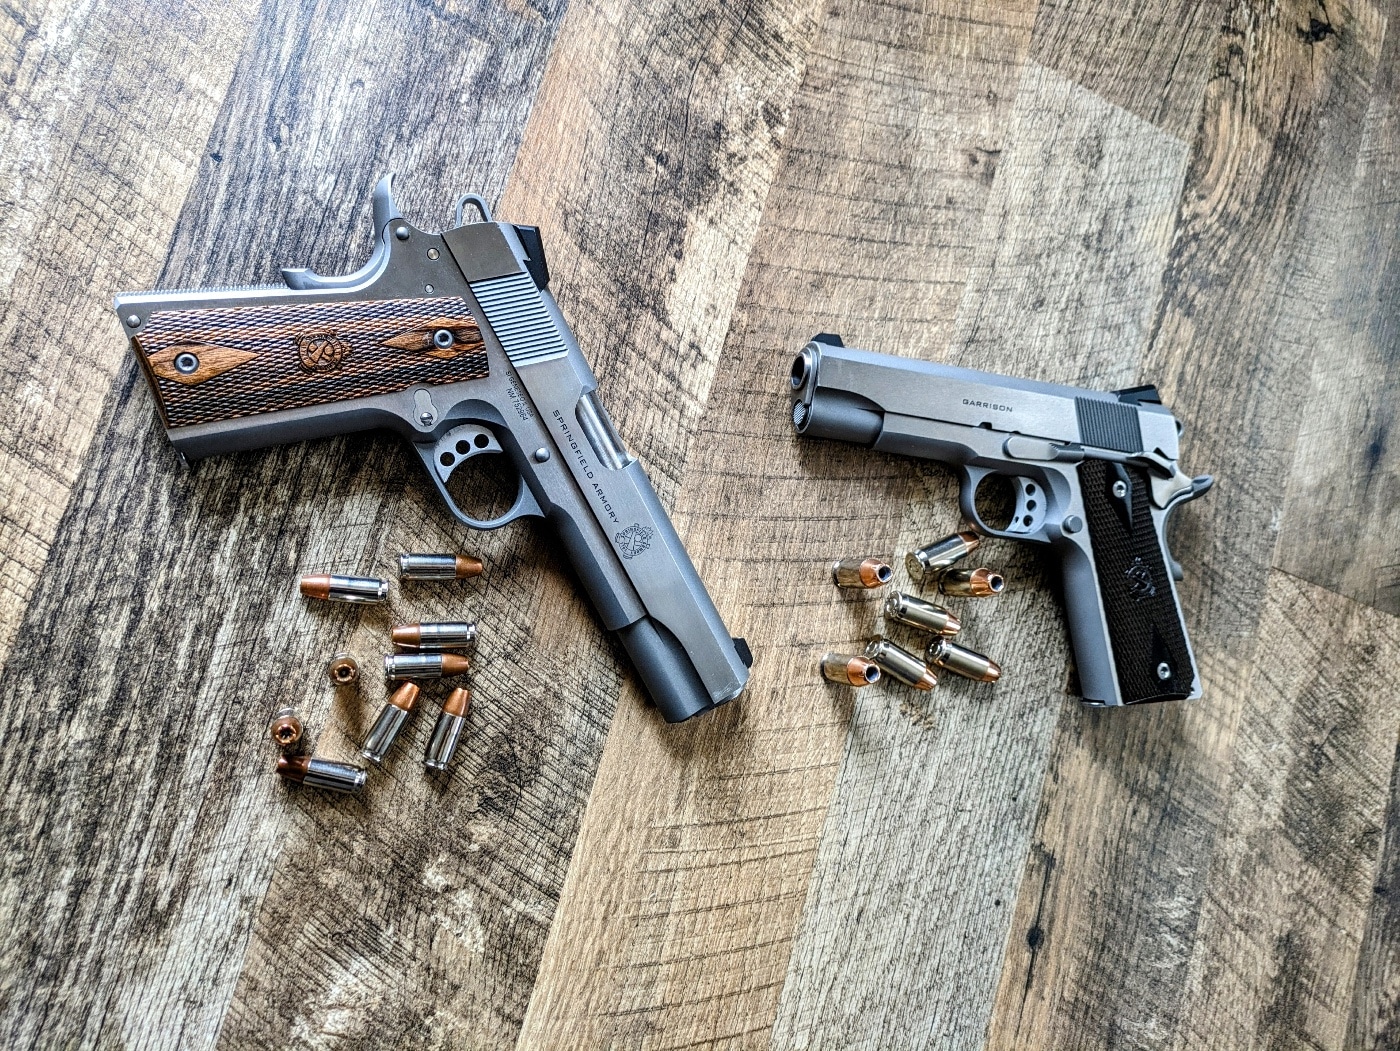 In this photograph, we see both of the Springfield Armory Garrison 1911 pistols - one in 9x19mm Parabellum and the other in .45 ACP.